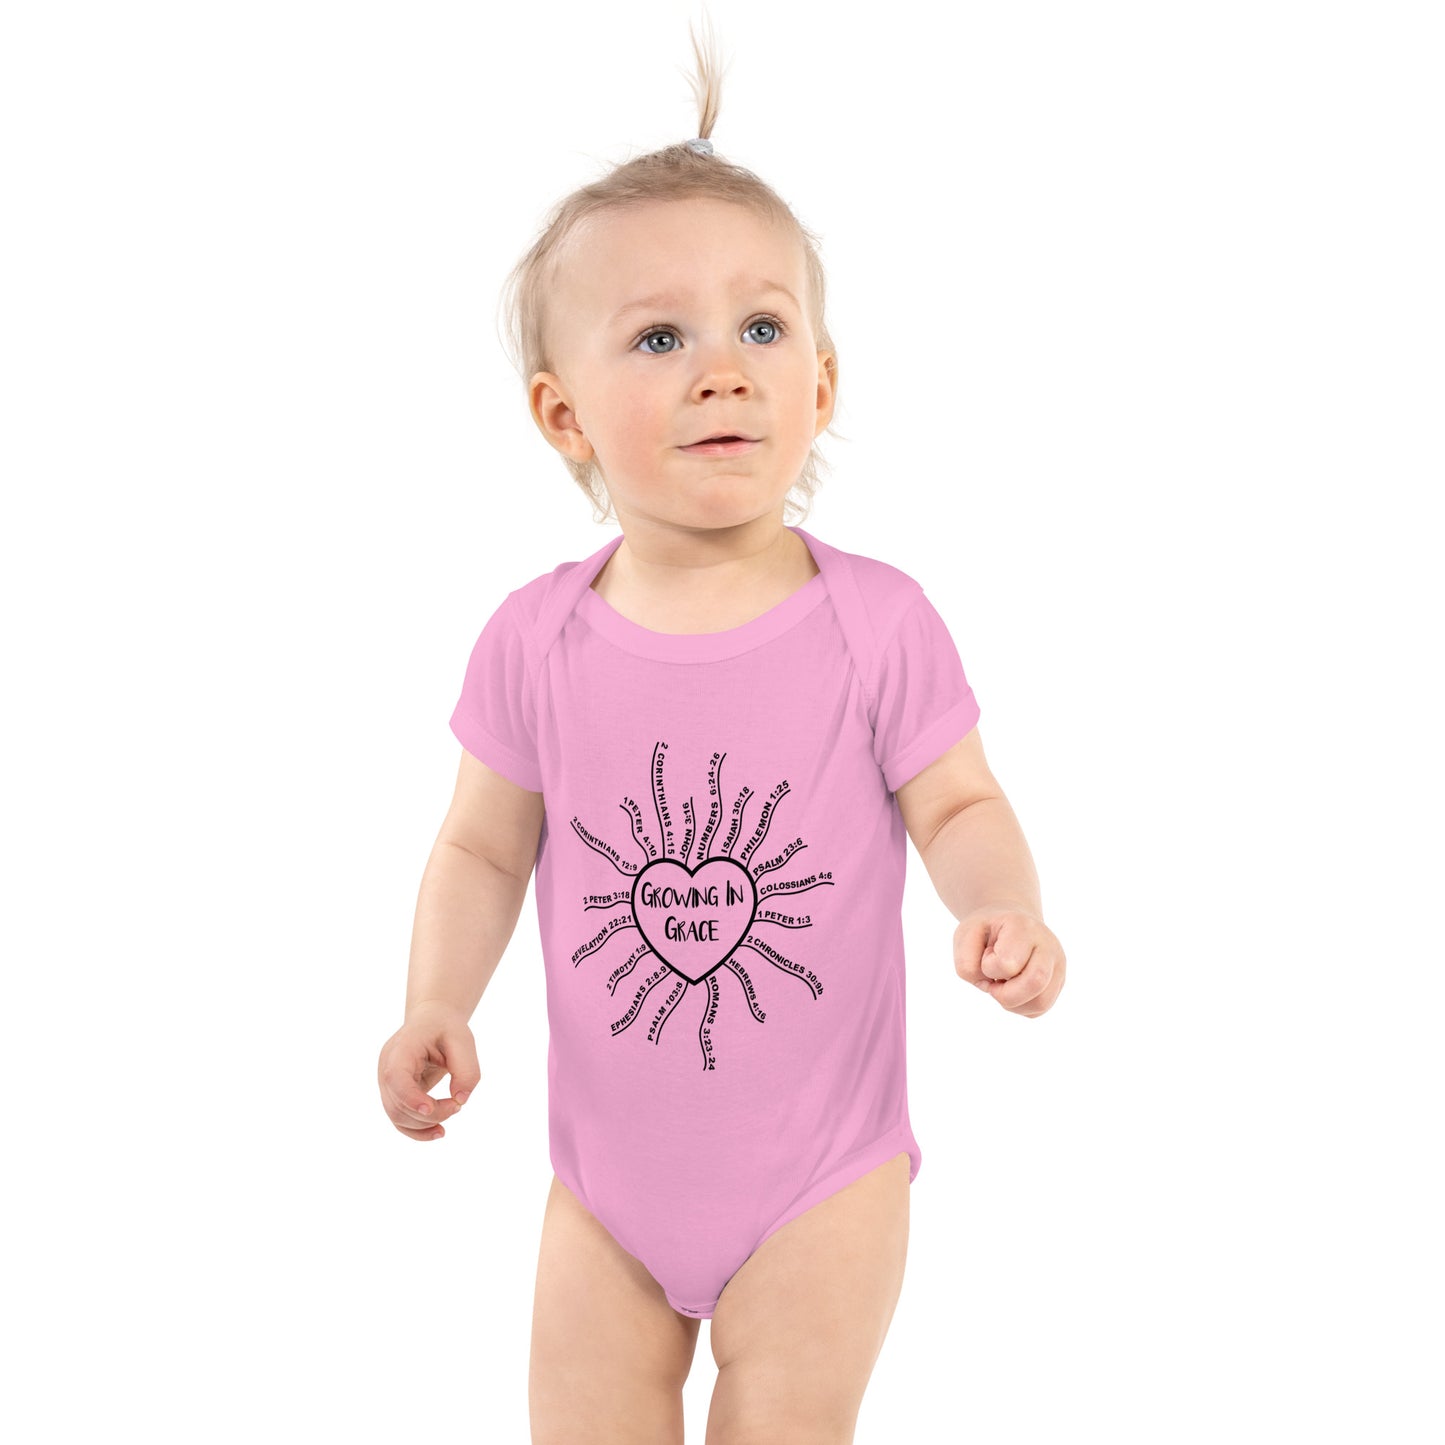 Infant/Toddler Onesie/Bodysuit - White, Grey, and Pink